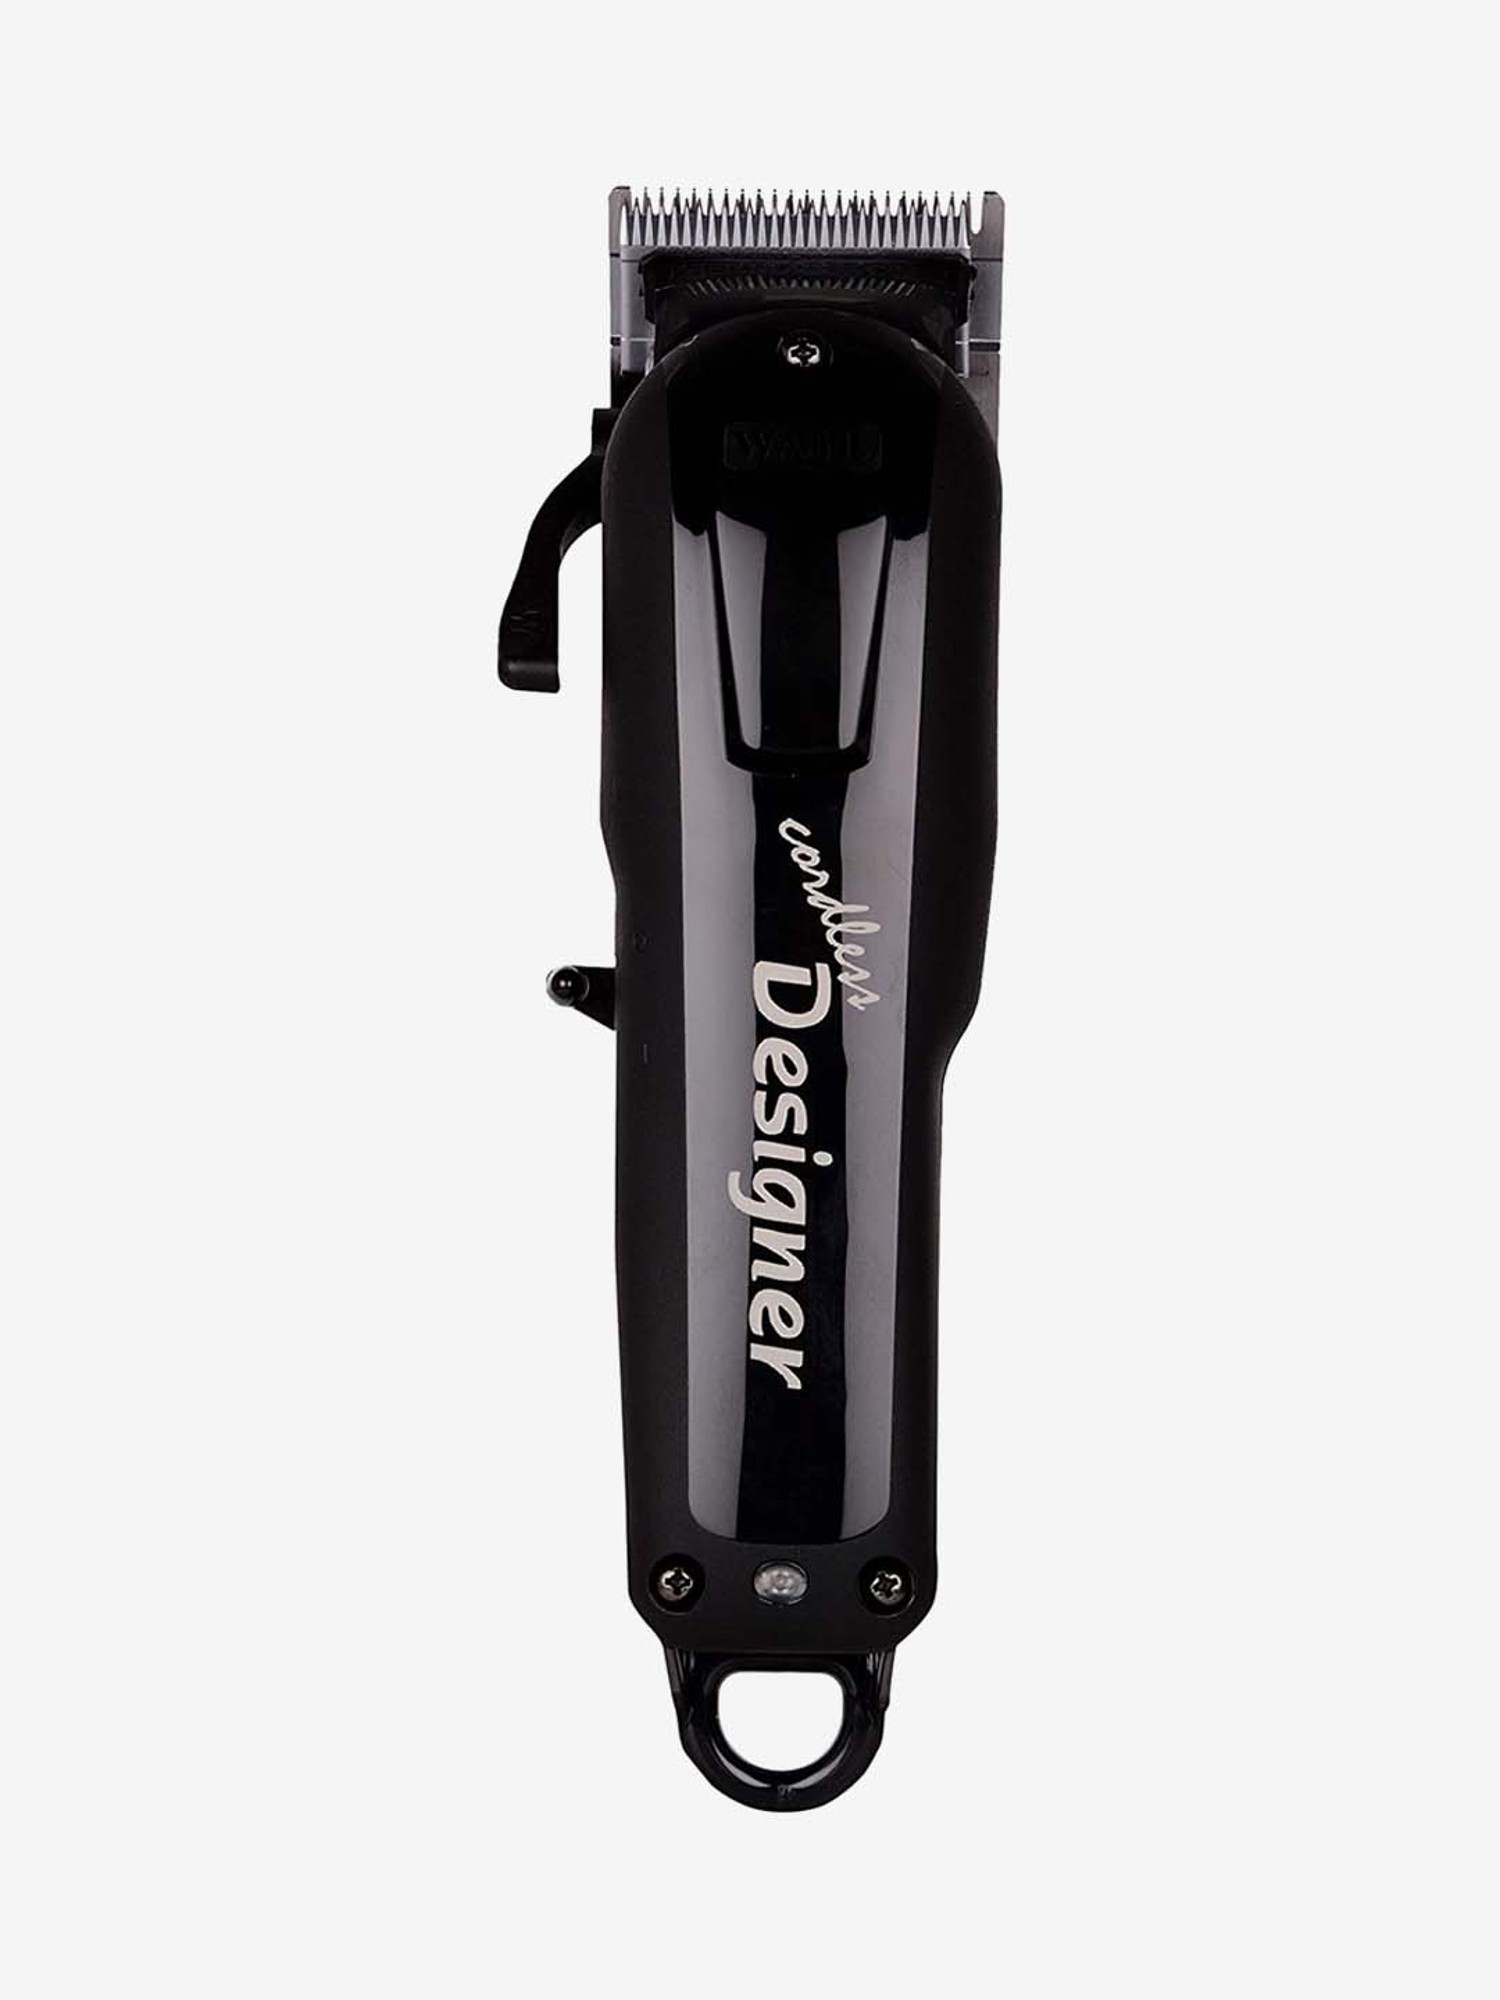 wahl designer clippers manual